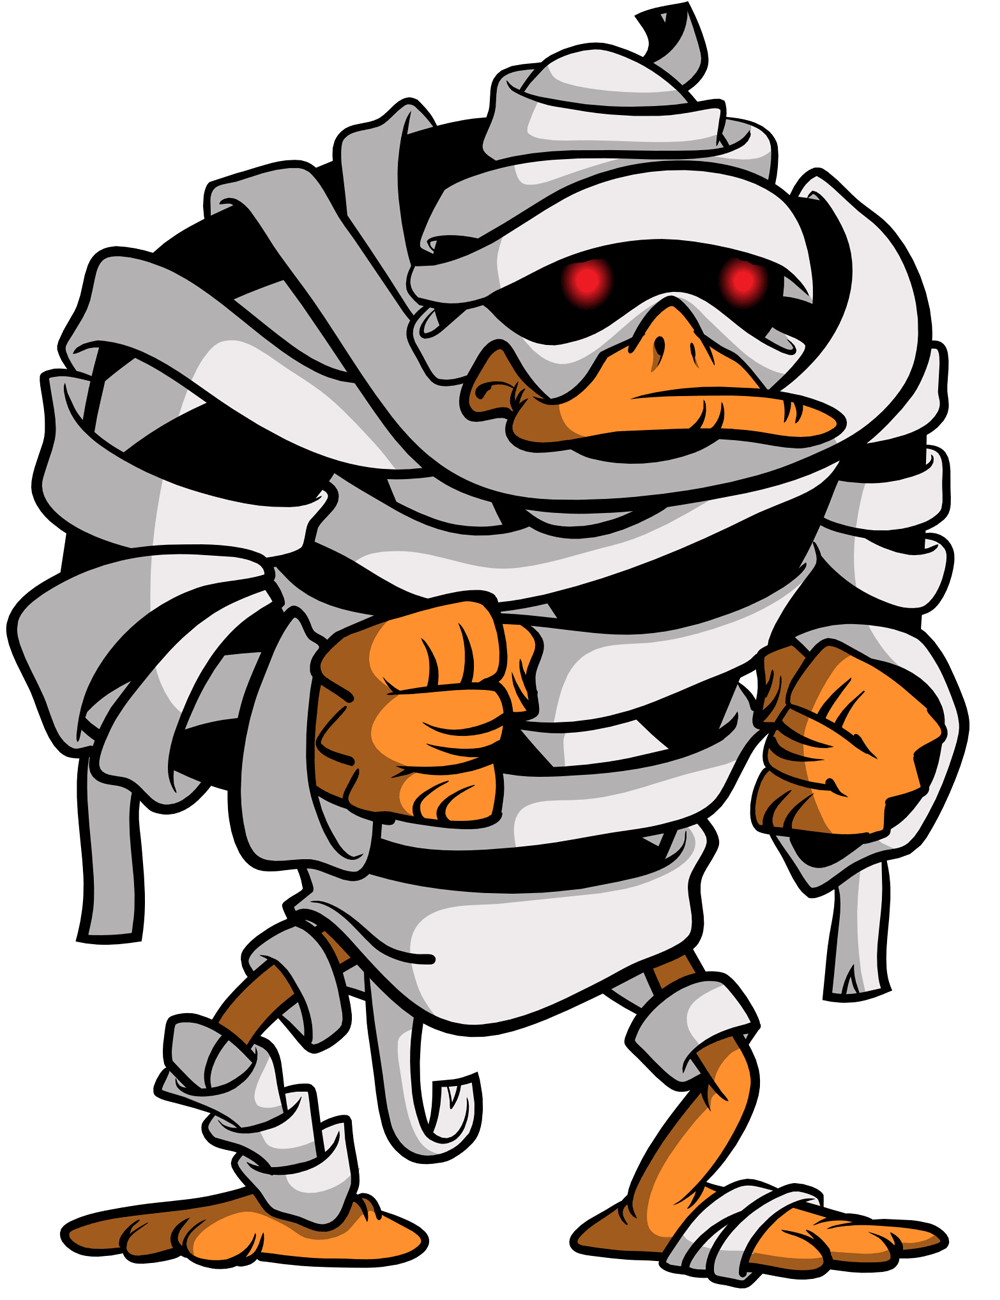 Mummy Duck - Characters & Art - DuckTales Remastered